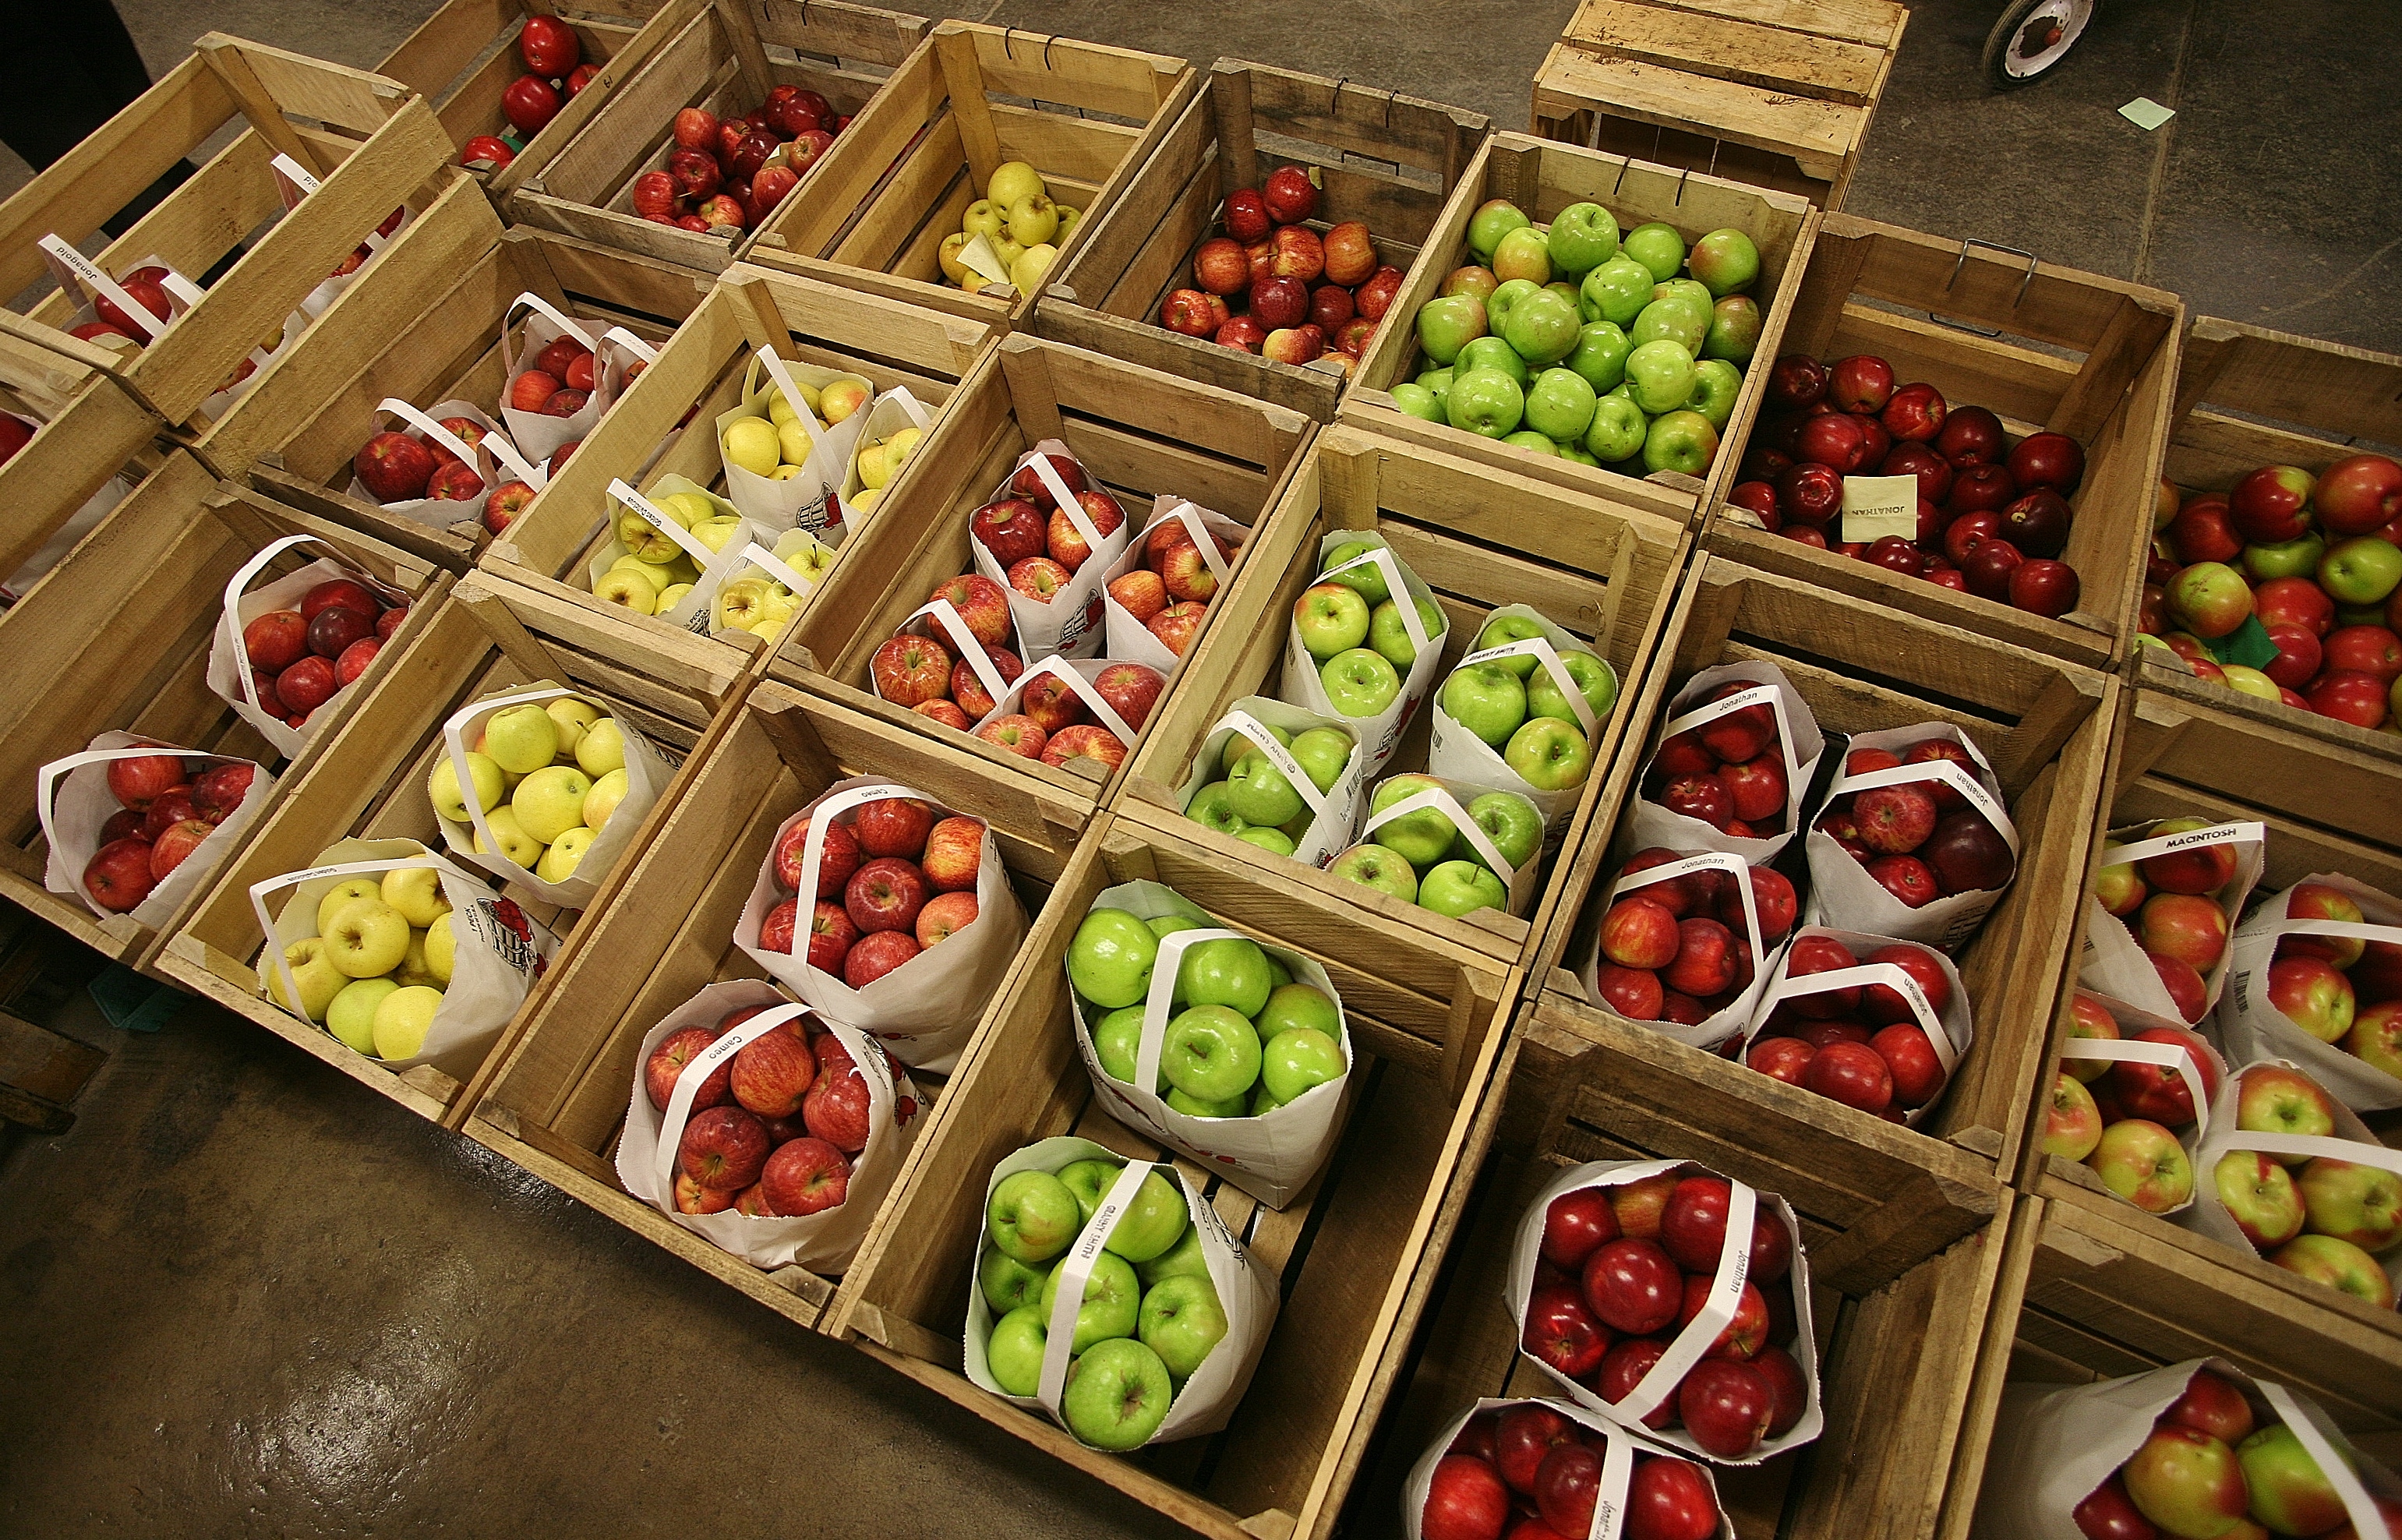 Image Apples in crates after being graded.